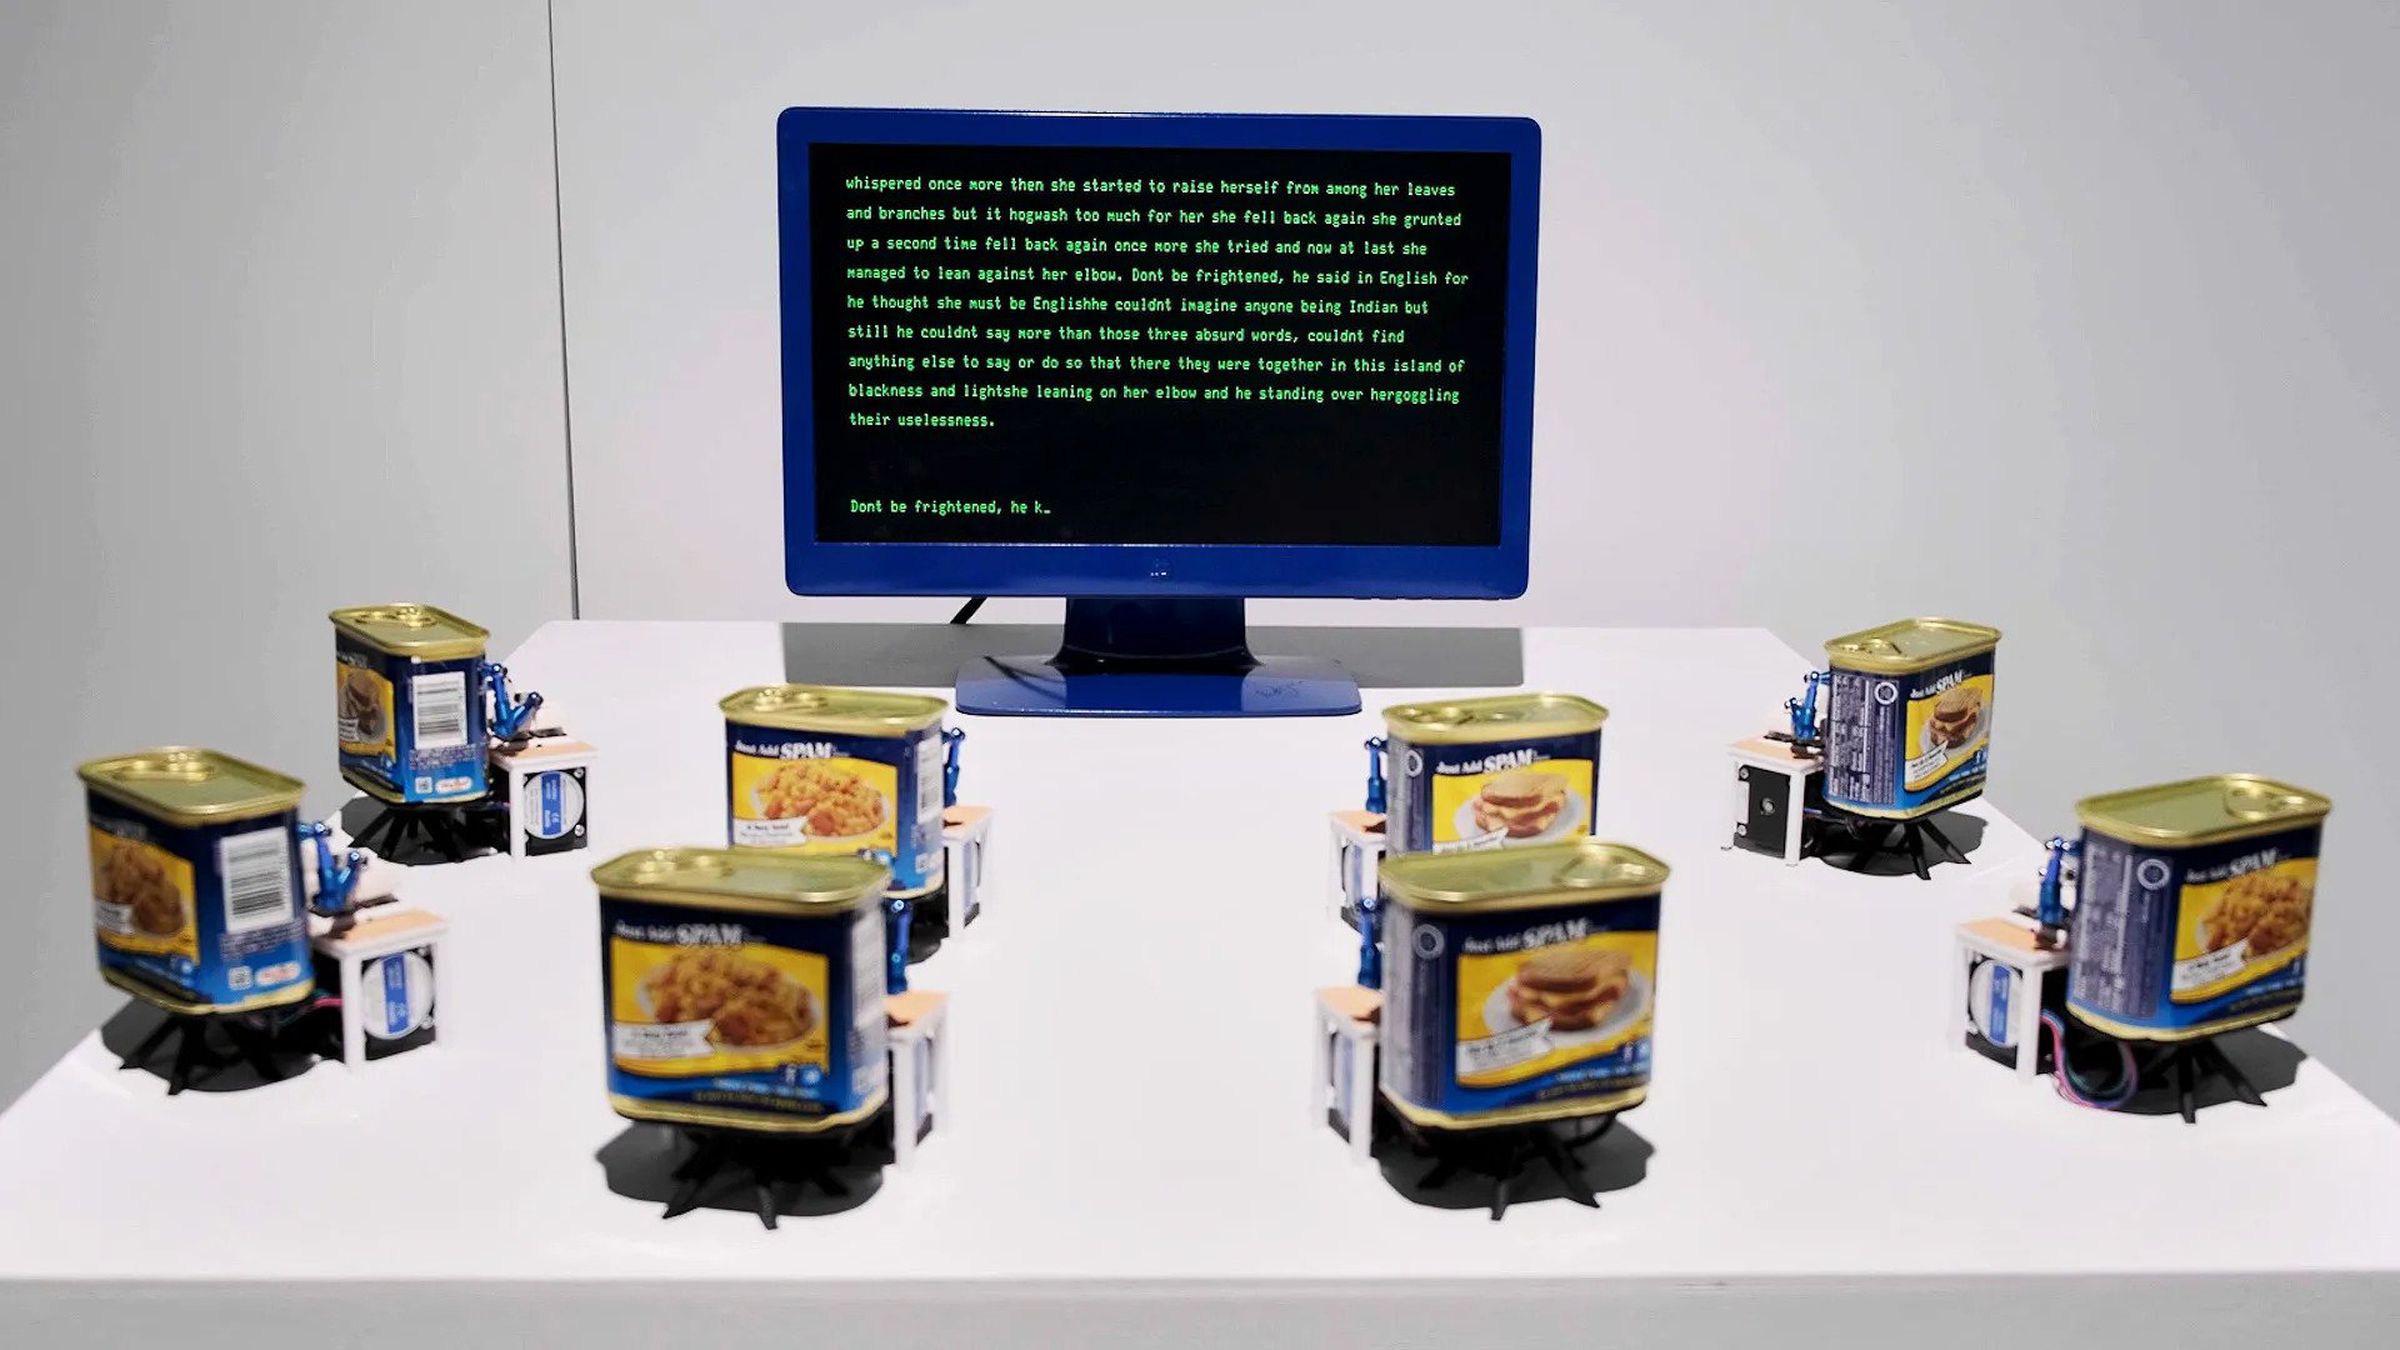 Eight tins of Spam converted into typing robots surrounding a display.